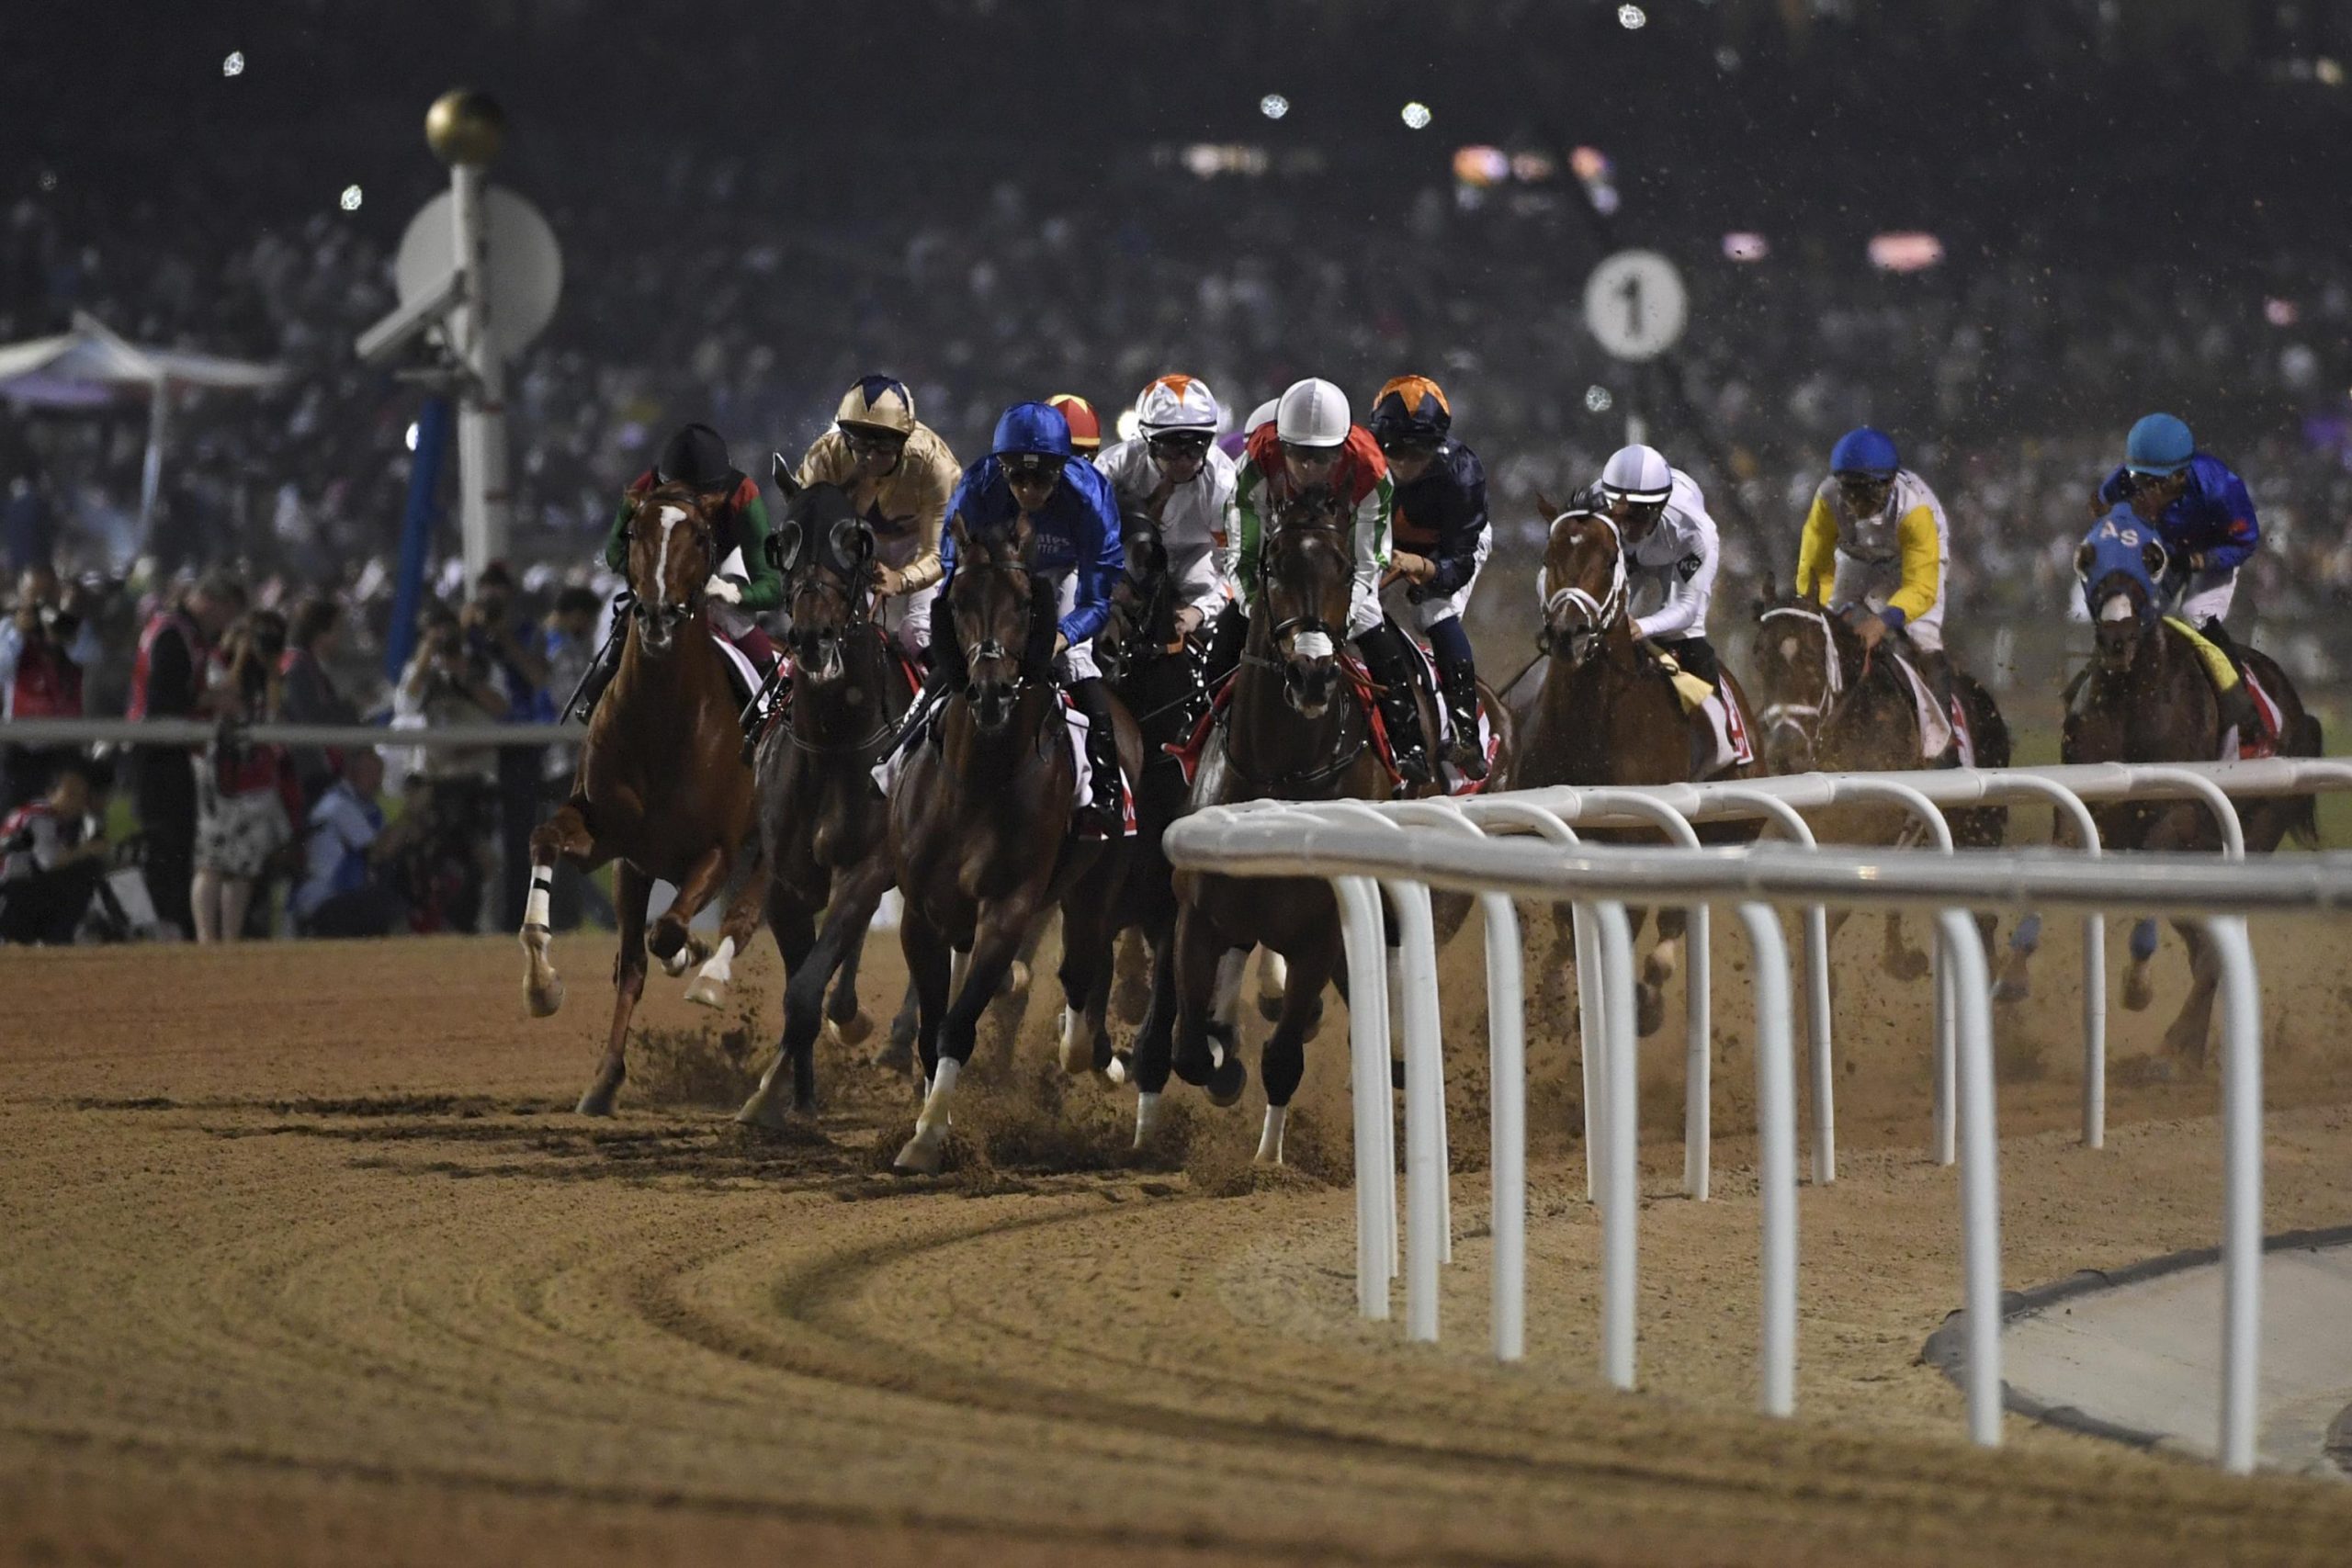 Horse Racing 2020 Handle Closely on Par with 2019, Though Purses Fall Steeply